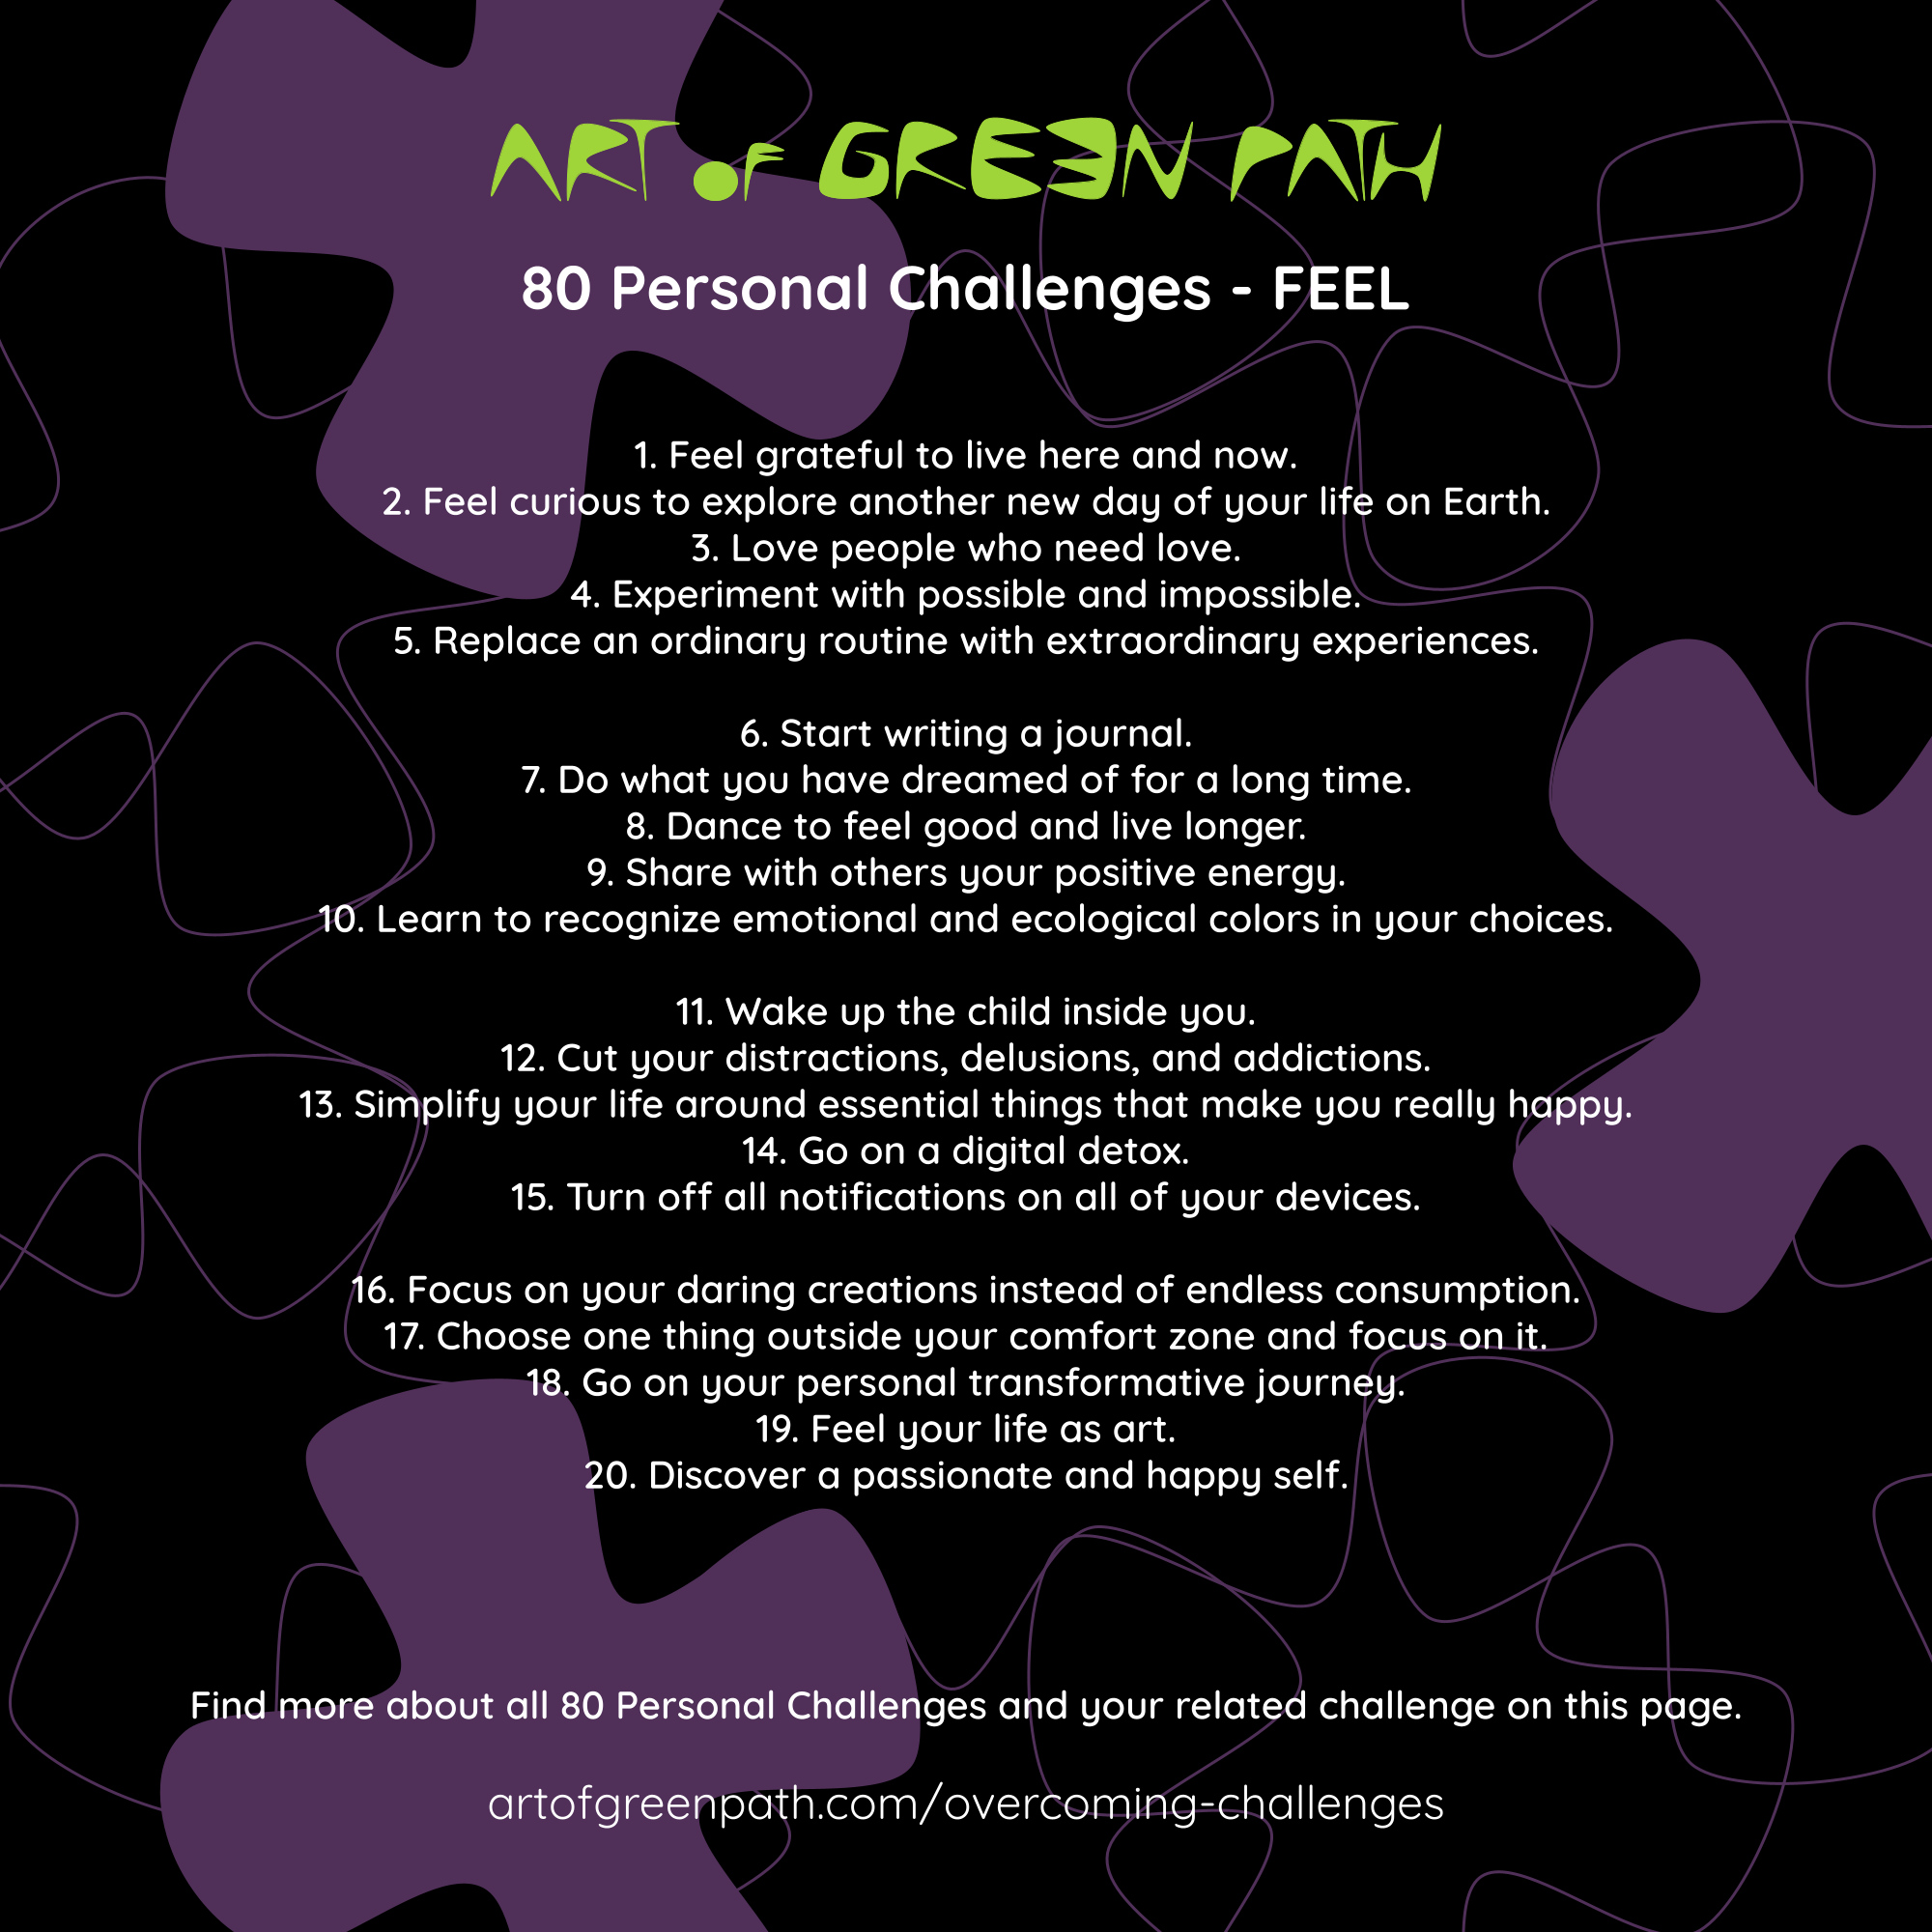 80 Personal Challenges - FEEL by Art Of Green Path